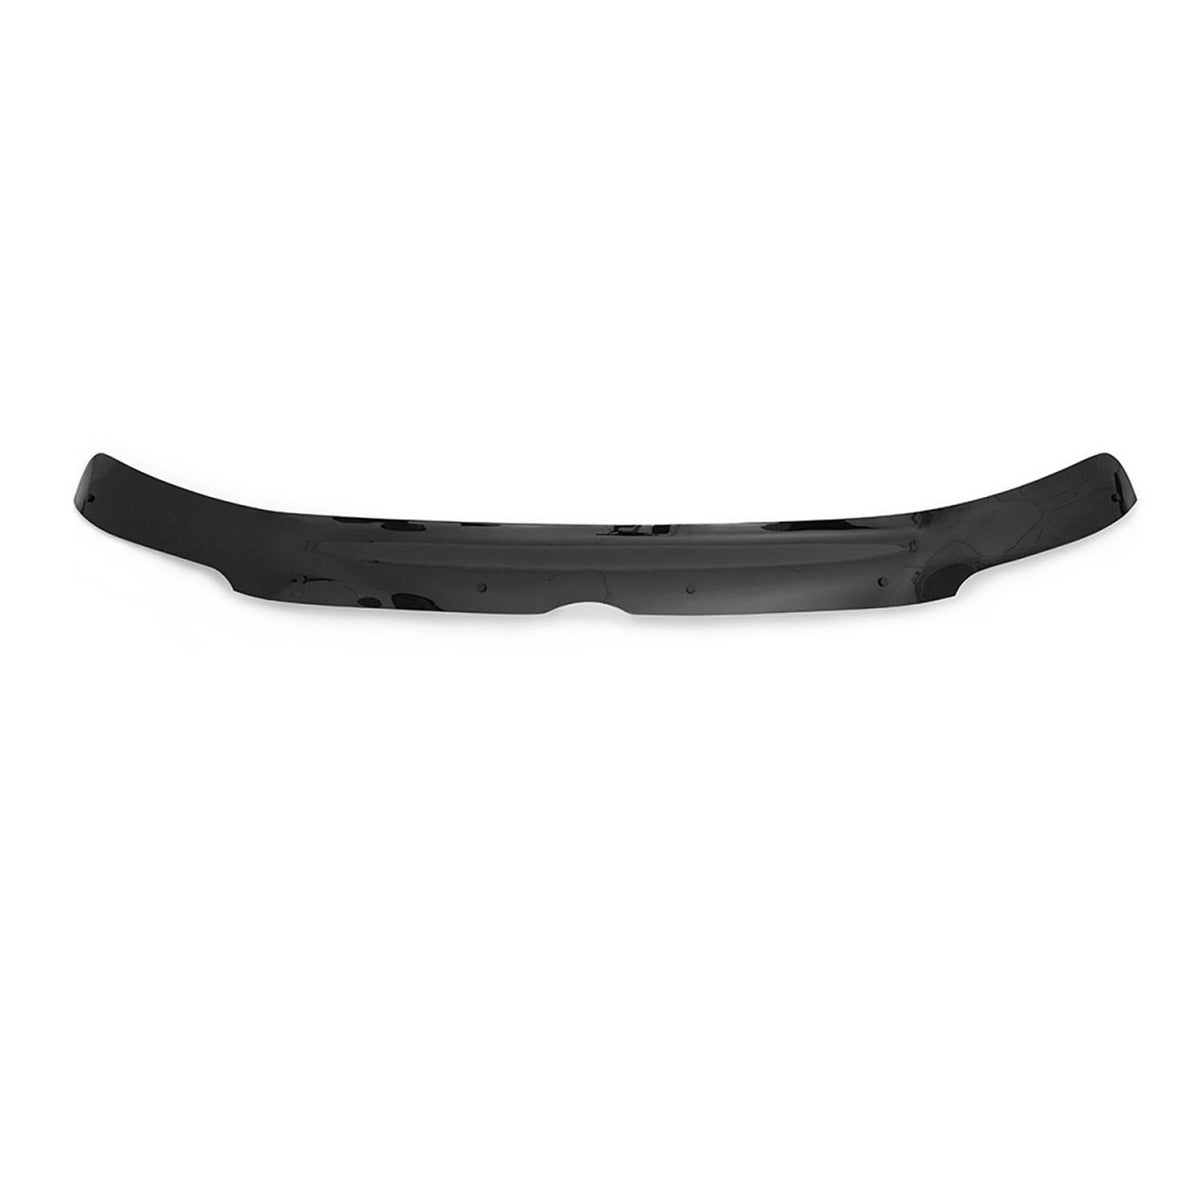 Bonnet deflector insect stone guard for VW T5 2003-2009